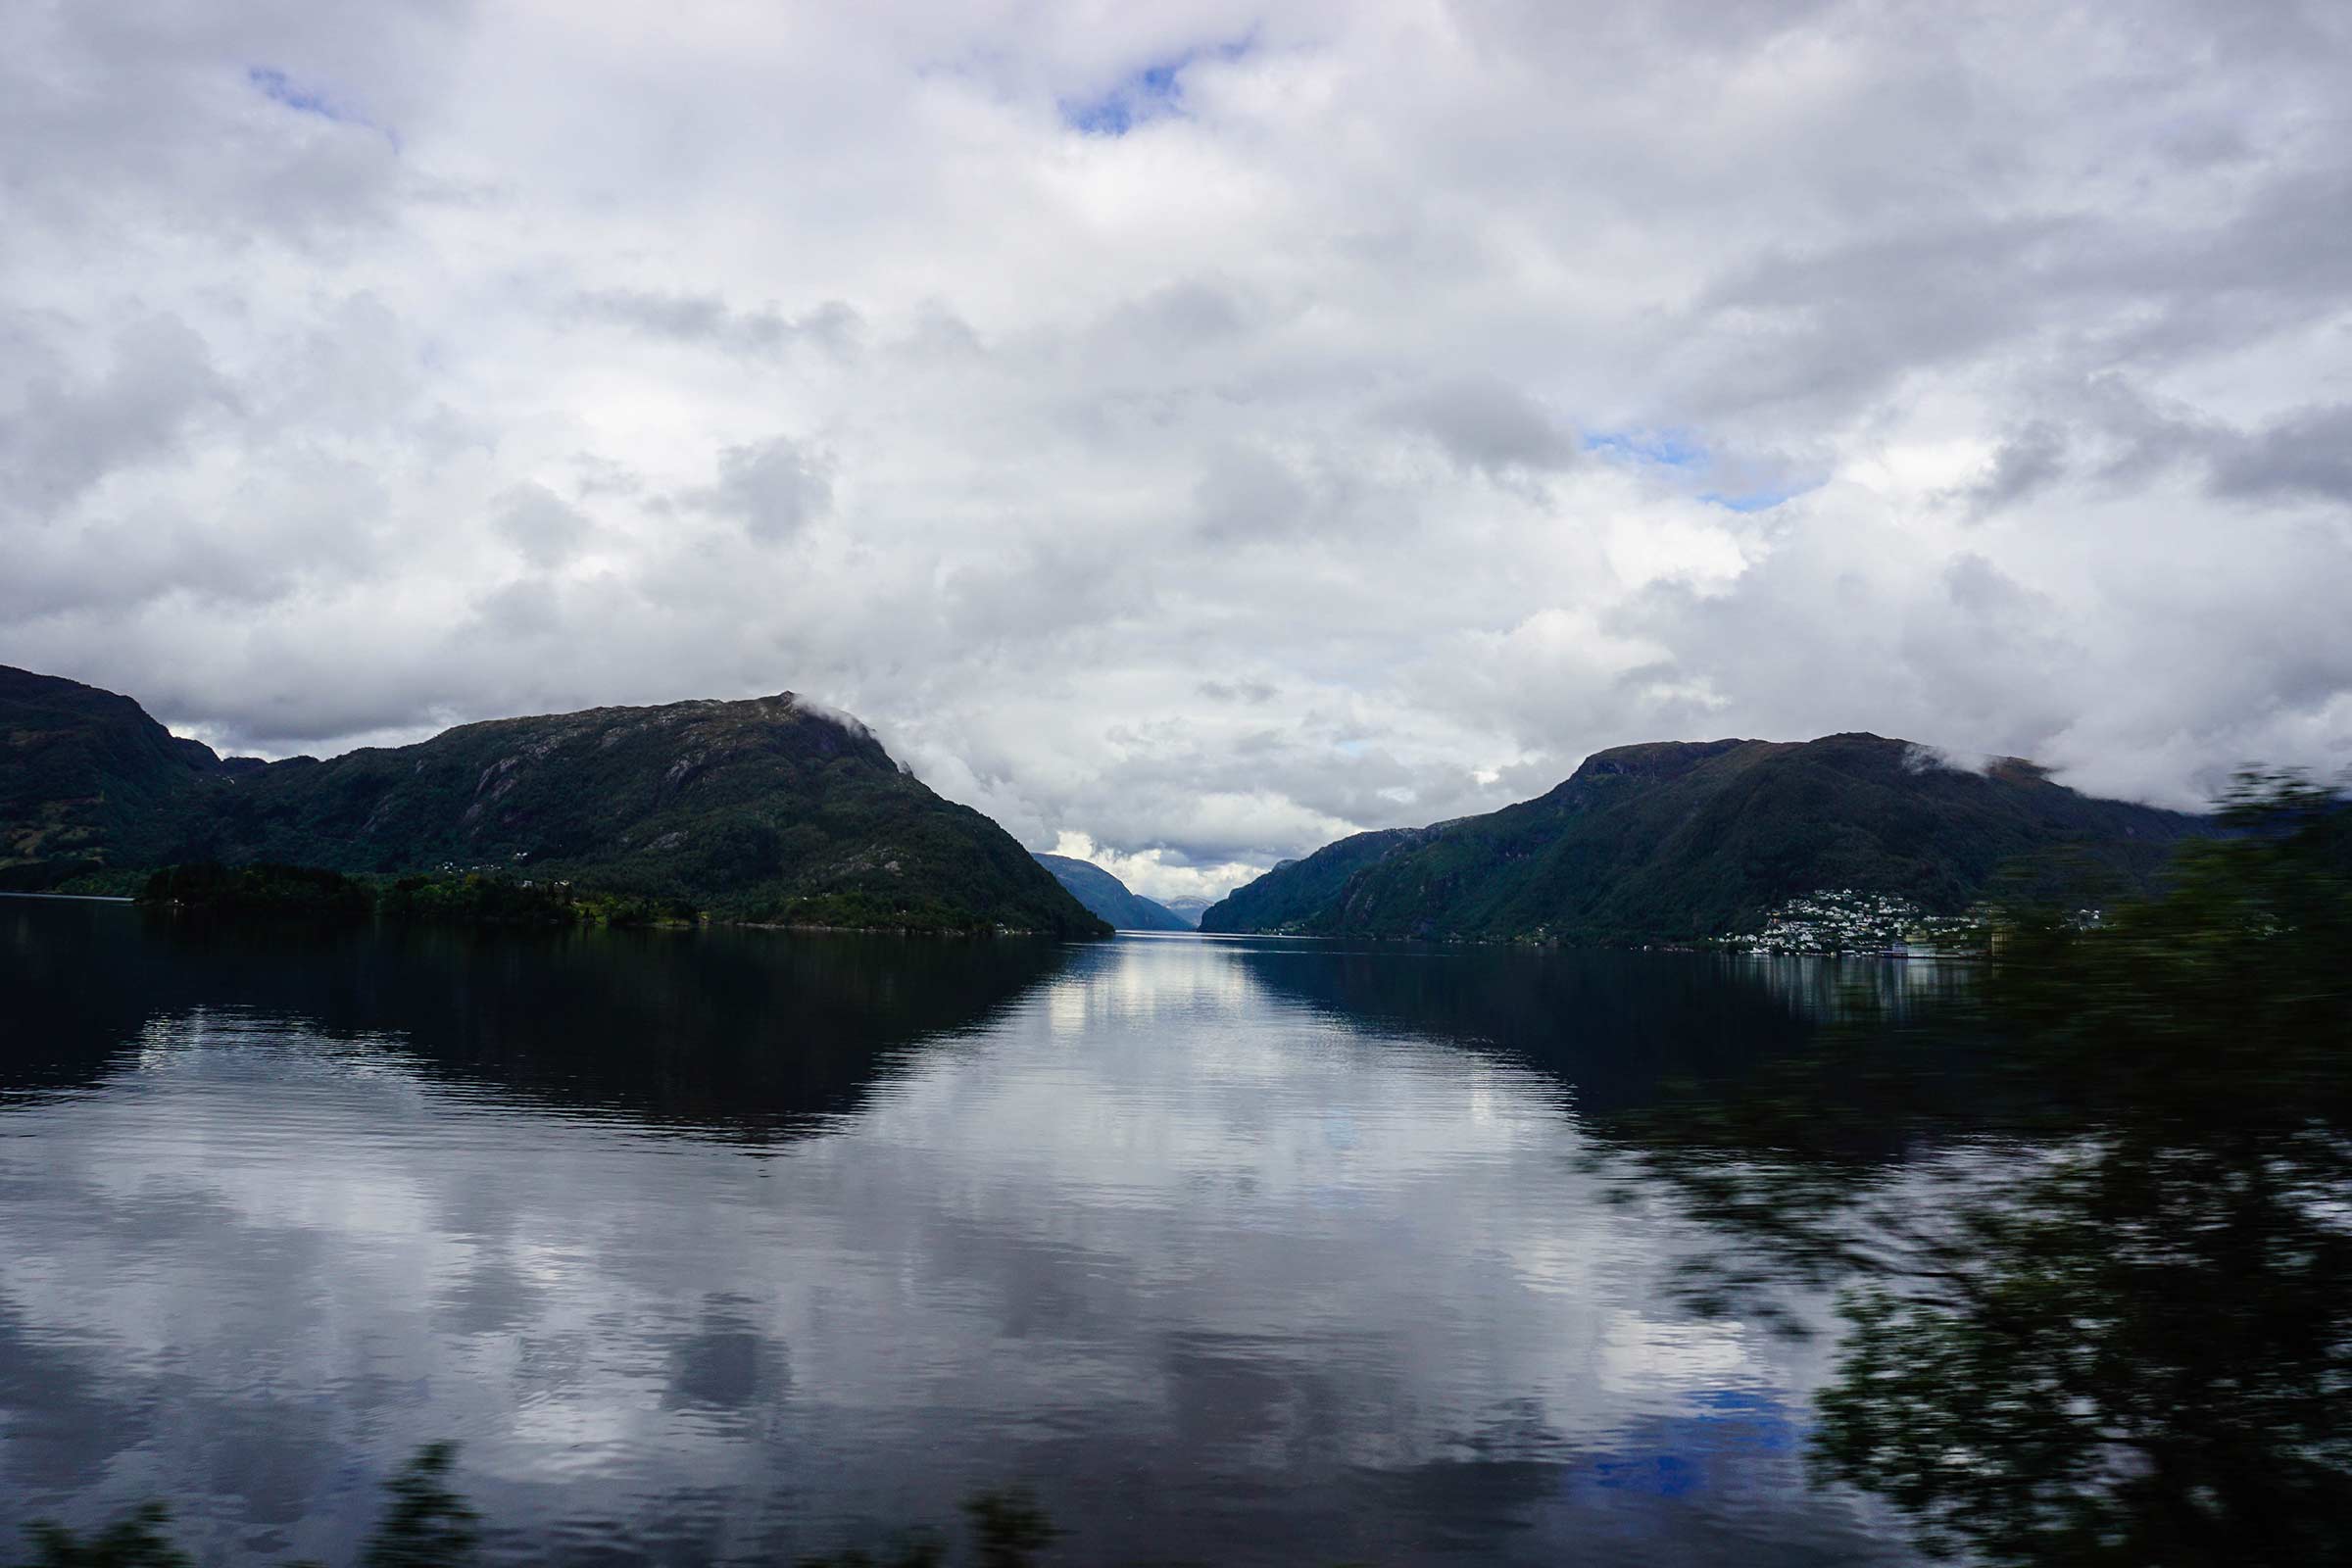 A picture of water in a fjord with mountains in the background and the reflection in the water.